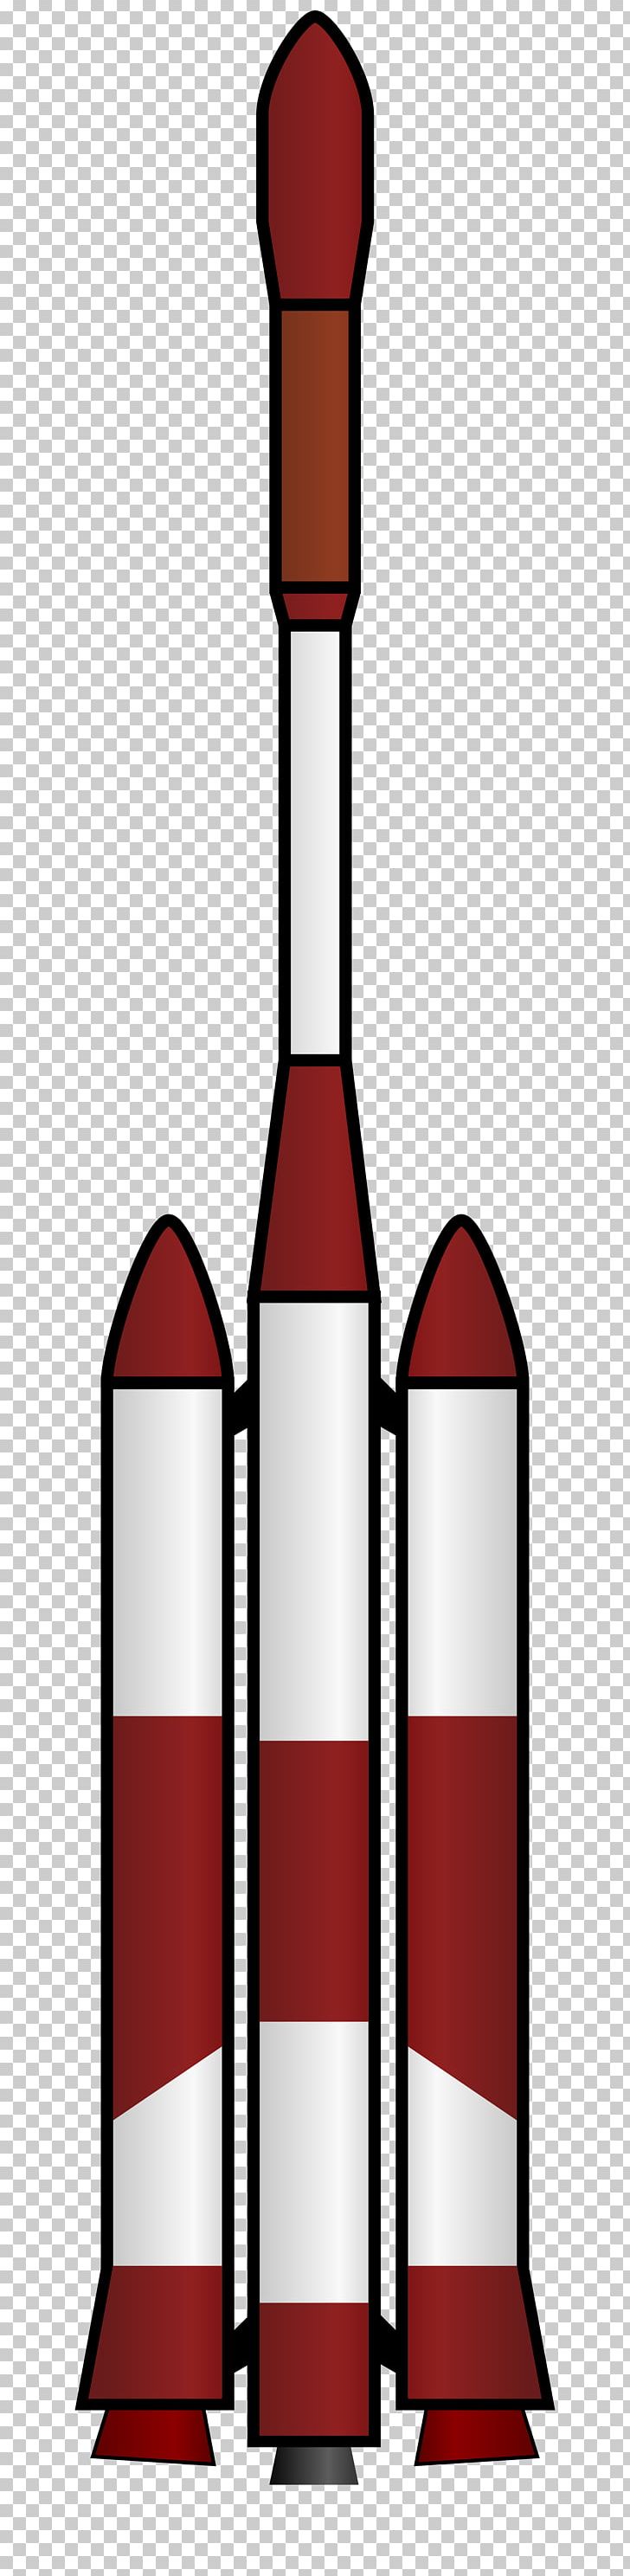 Augmented Satellite Launch Vehicle Rocket Indian Space Research Organisation PNG, Clipart, Barware, Glass Bottle, Launch Vehicle, Nasa, Polar Satellite Launch Vehicle Free PNG Download